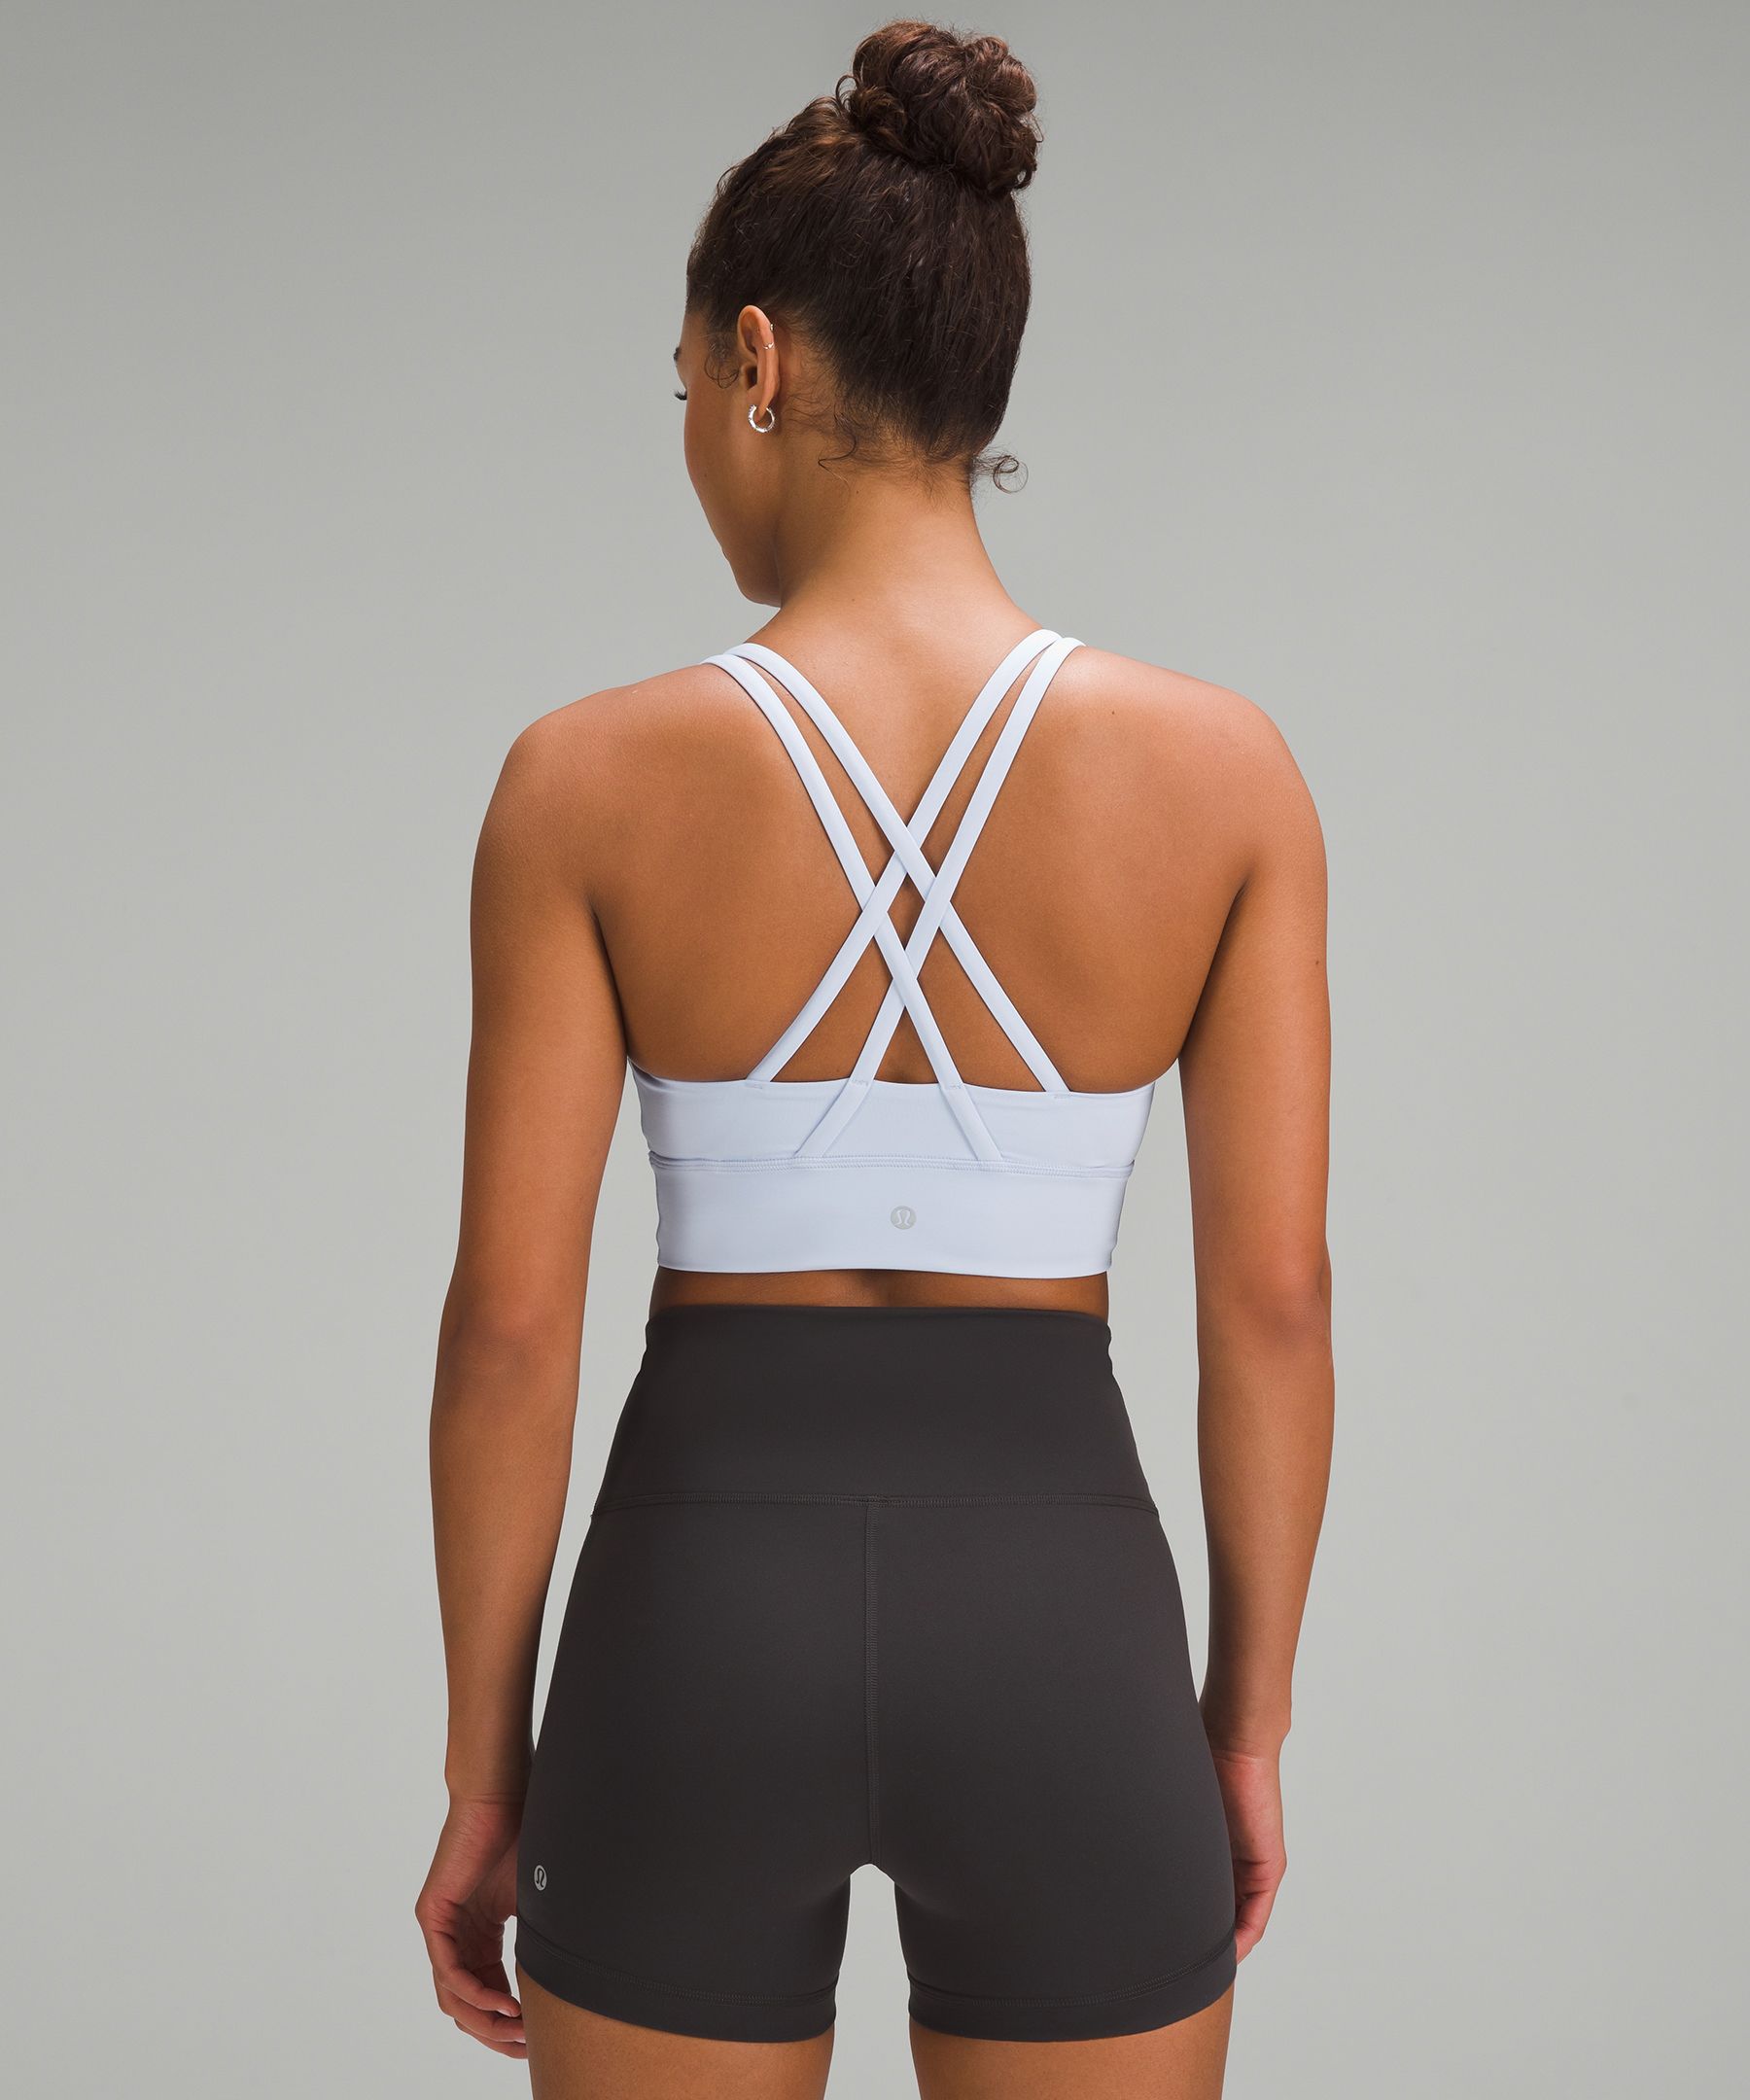 Color mixup for Energy Longline Bra pickup in Store? : r/lululemon